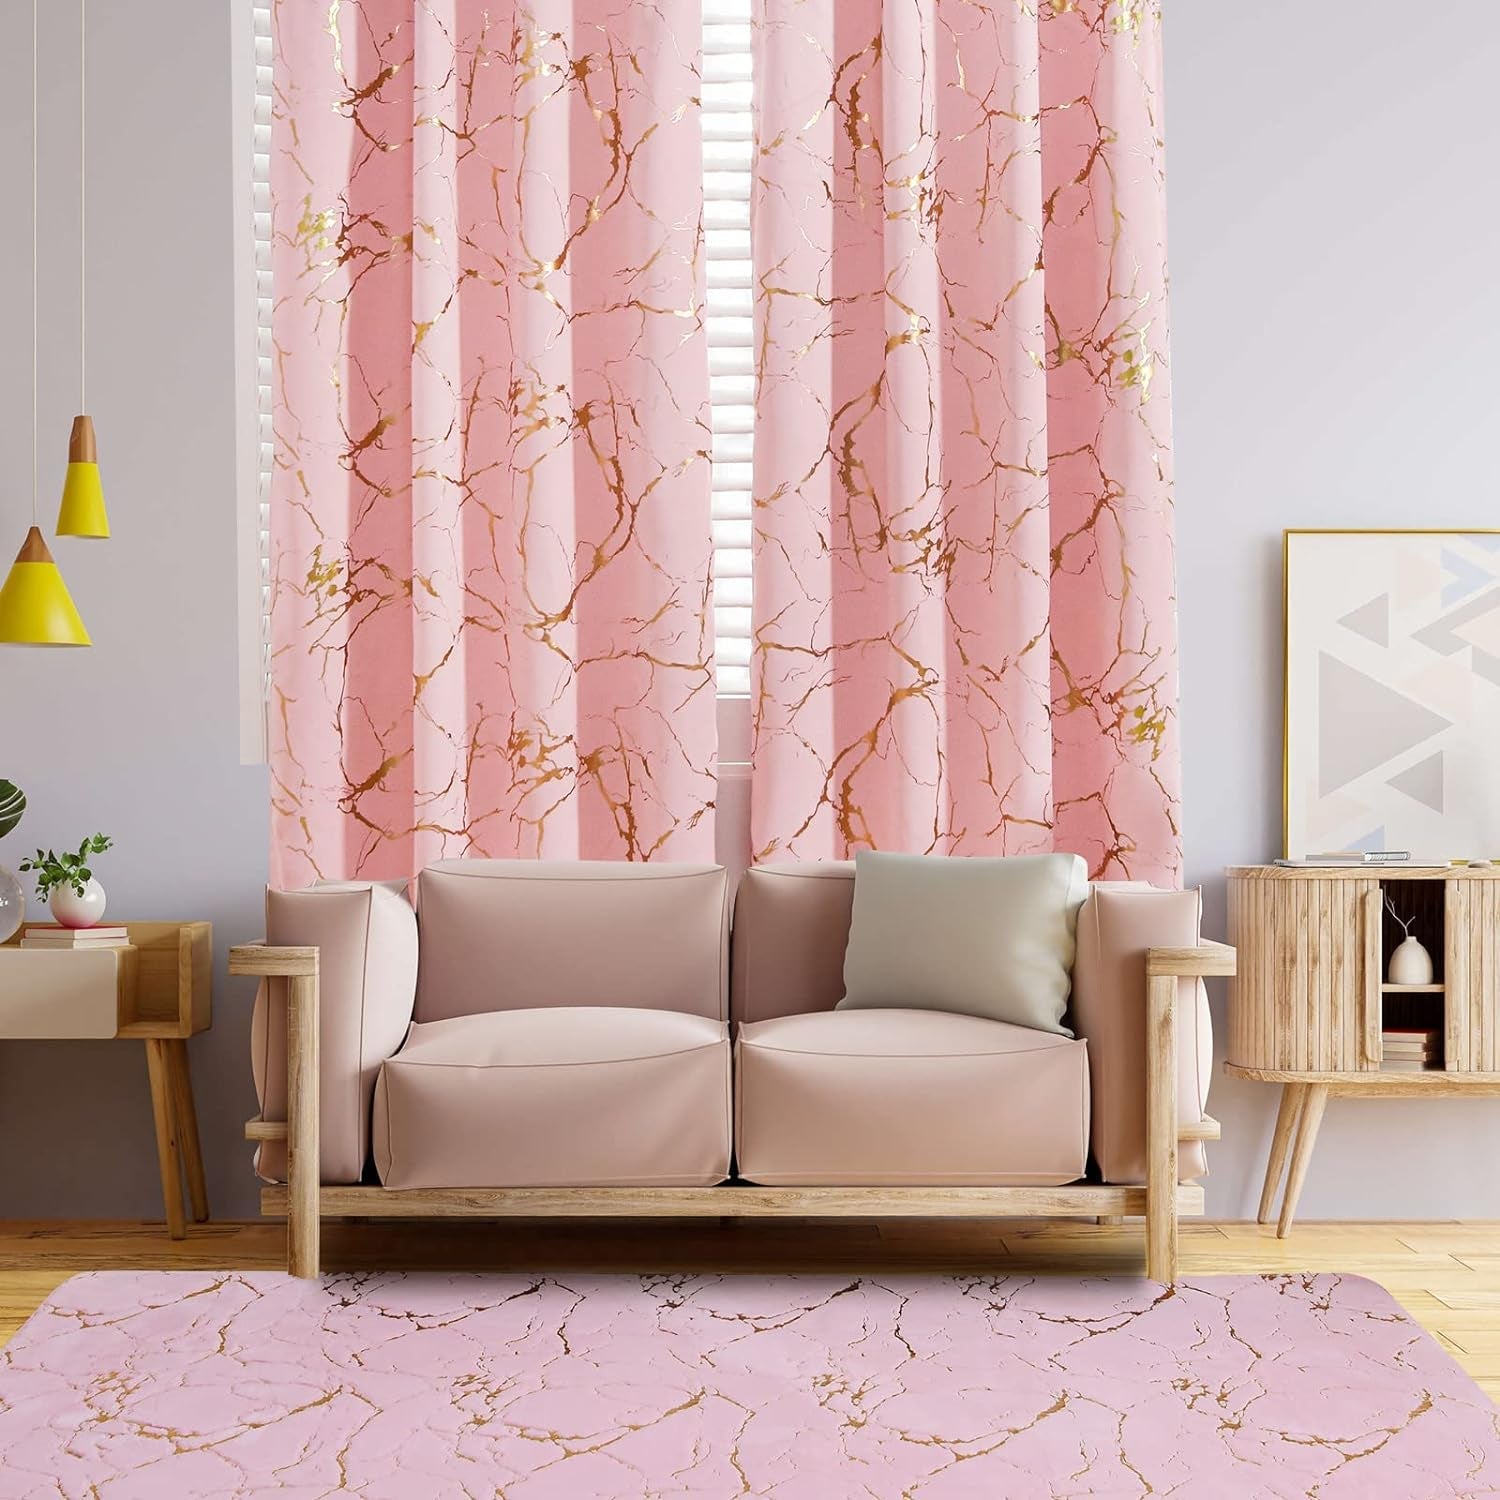 Aimuan Blush Gold Foil Curtains Printed Marble Grommet Blackout Curtain Panels Golden Metallic Glitter Drapery Window Drapes Valances for Bedroom Living Room, Pink 42X84